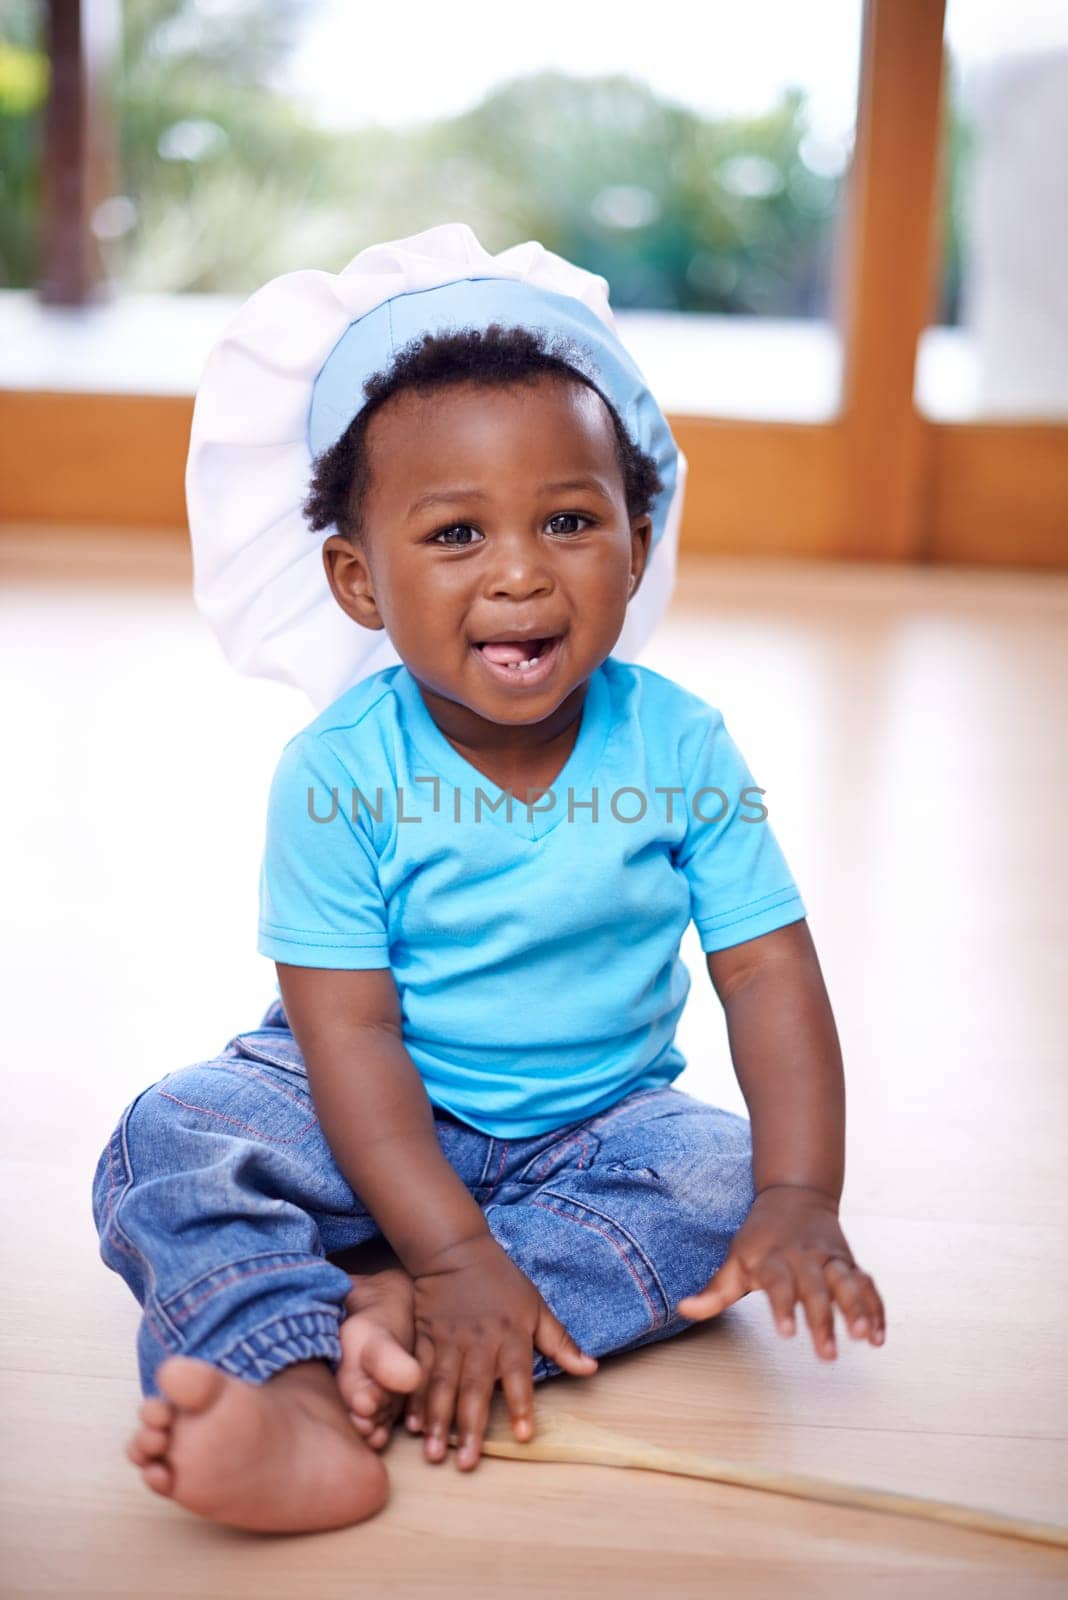 Black baby, portrait and chefs hat in house on floor for kids youth, playing and fun. African child, happy and smile in home in living room with toque for recreation, memories and family bonding by YuriArcurs